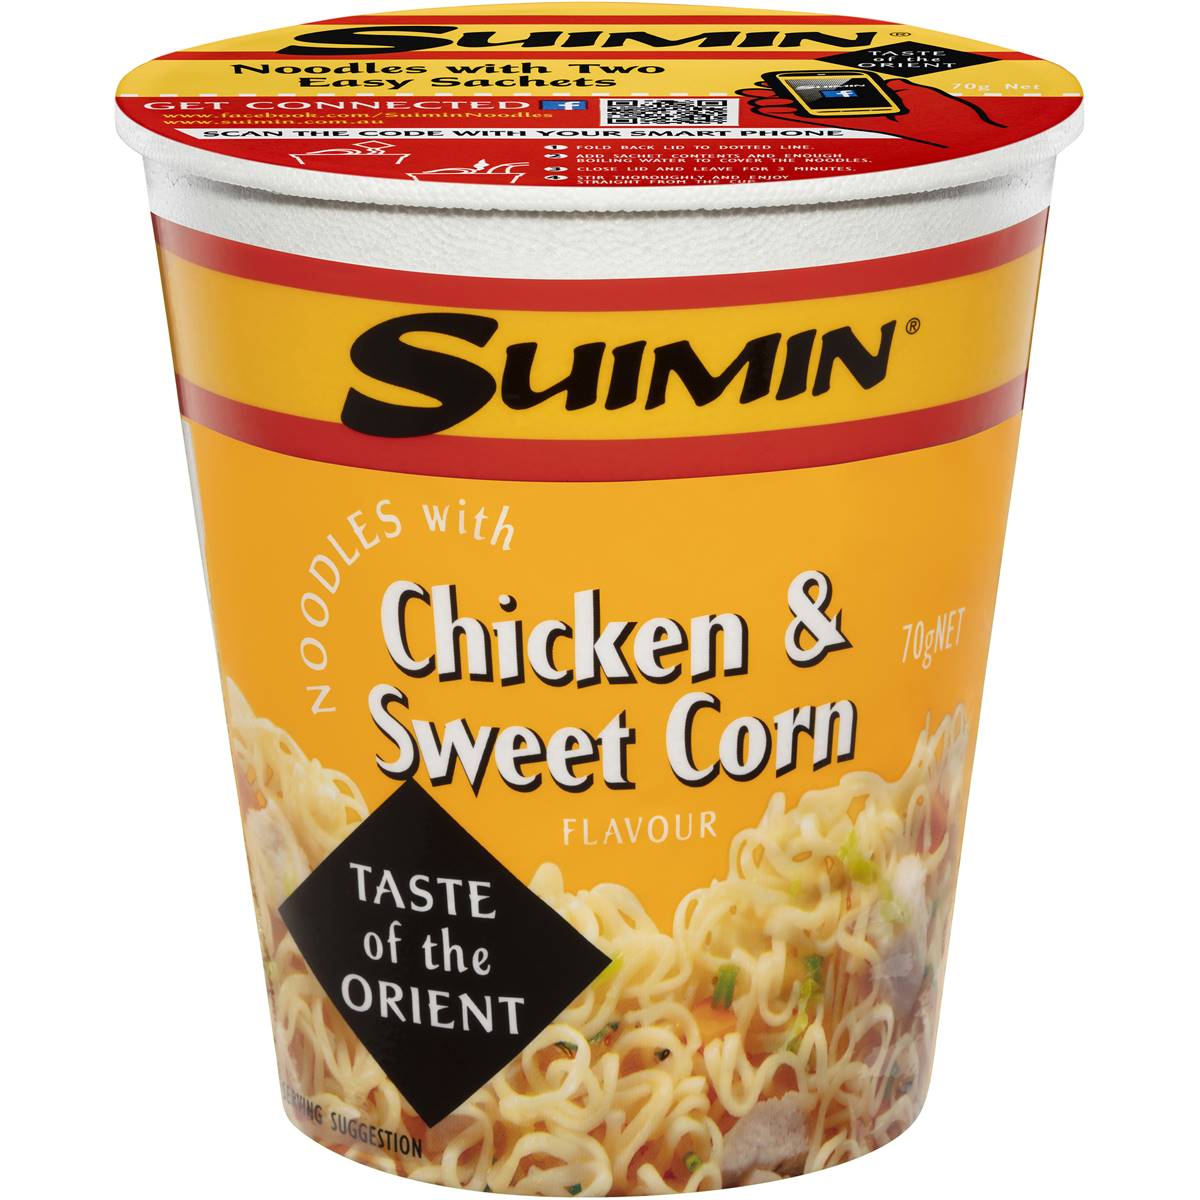 Suimin Chicken & Sweet Corn Noodle Cup